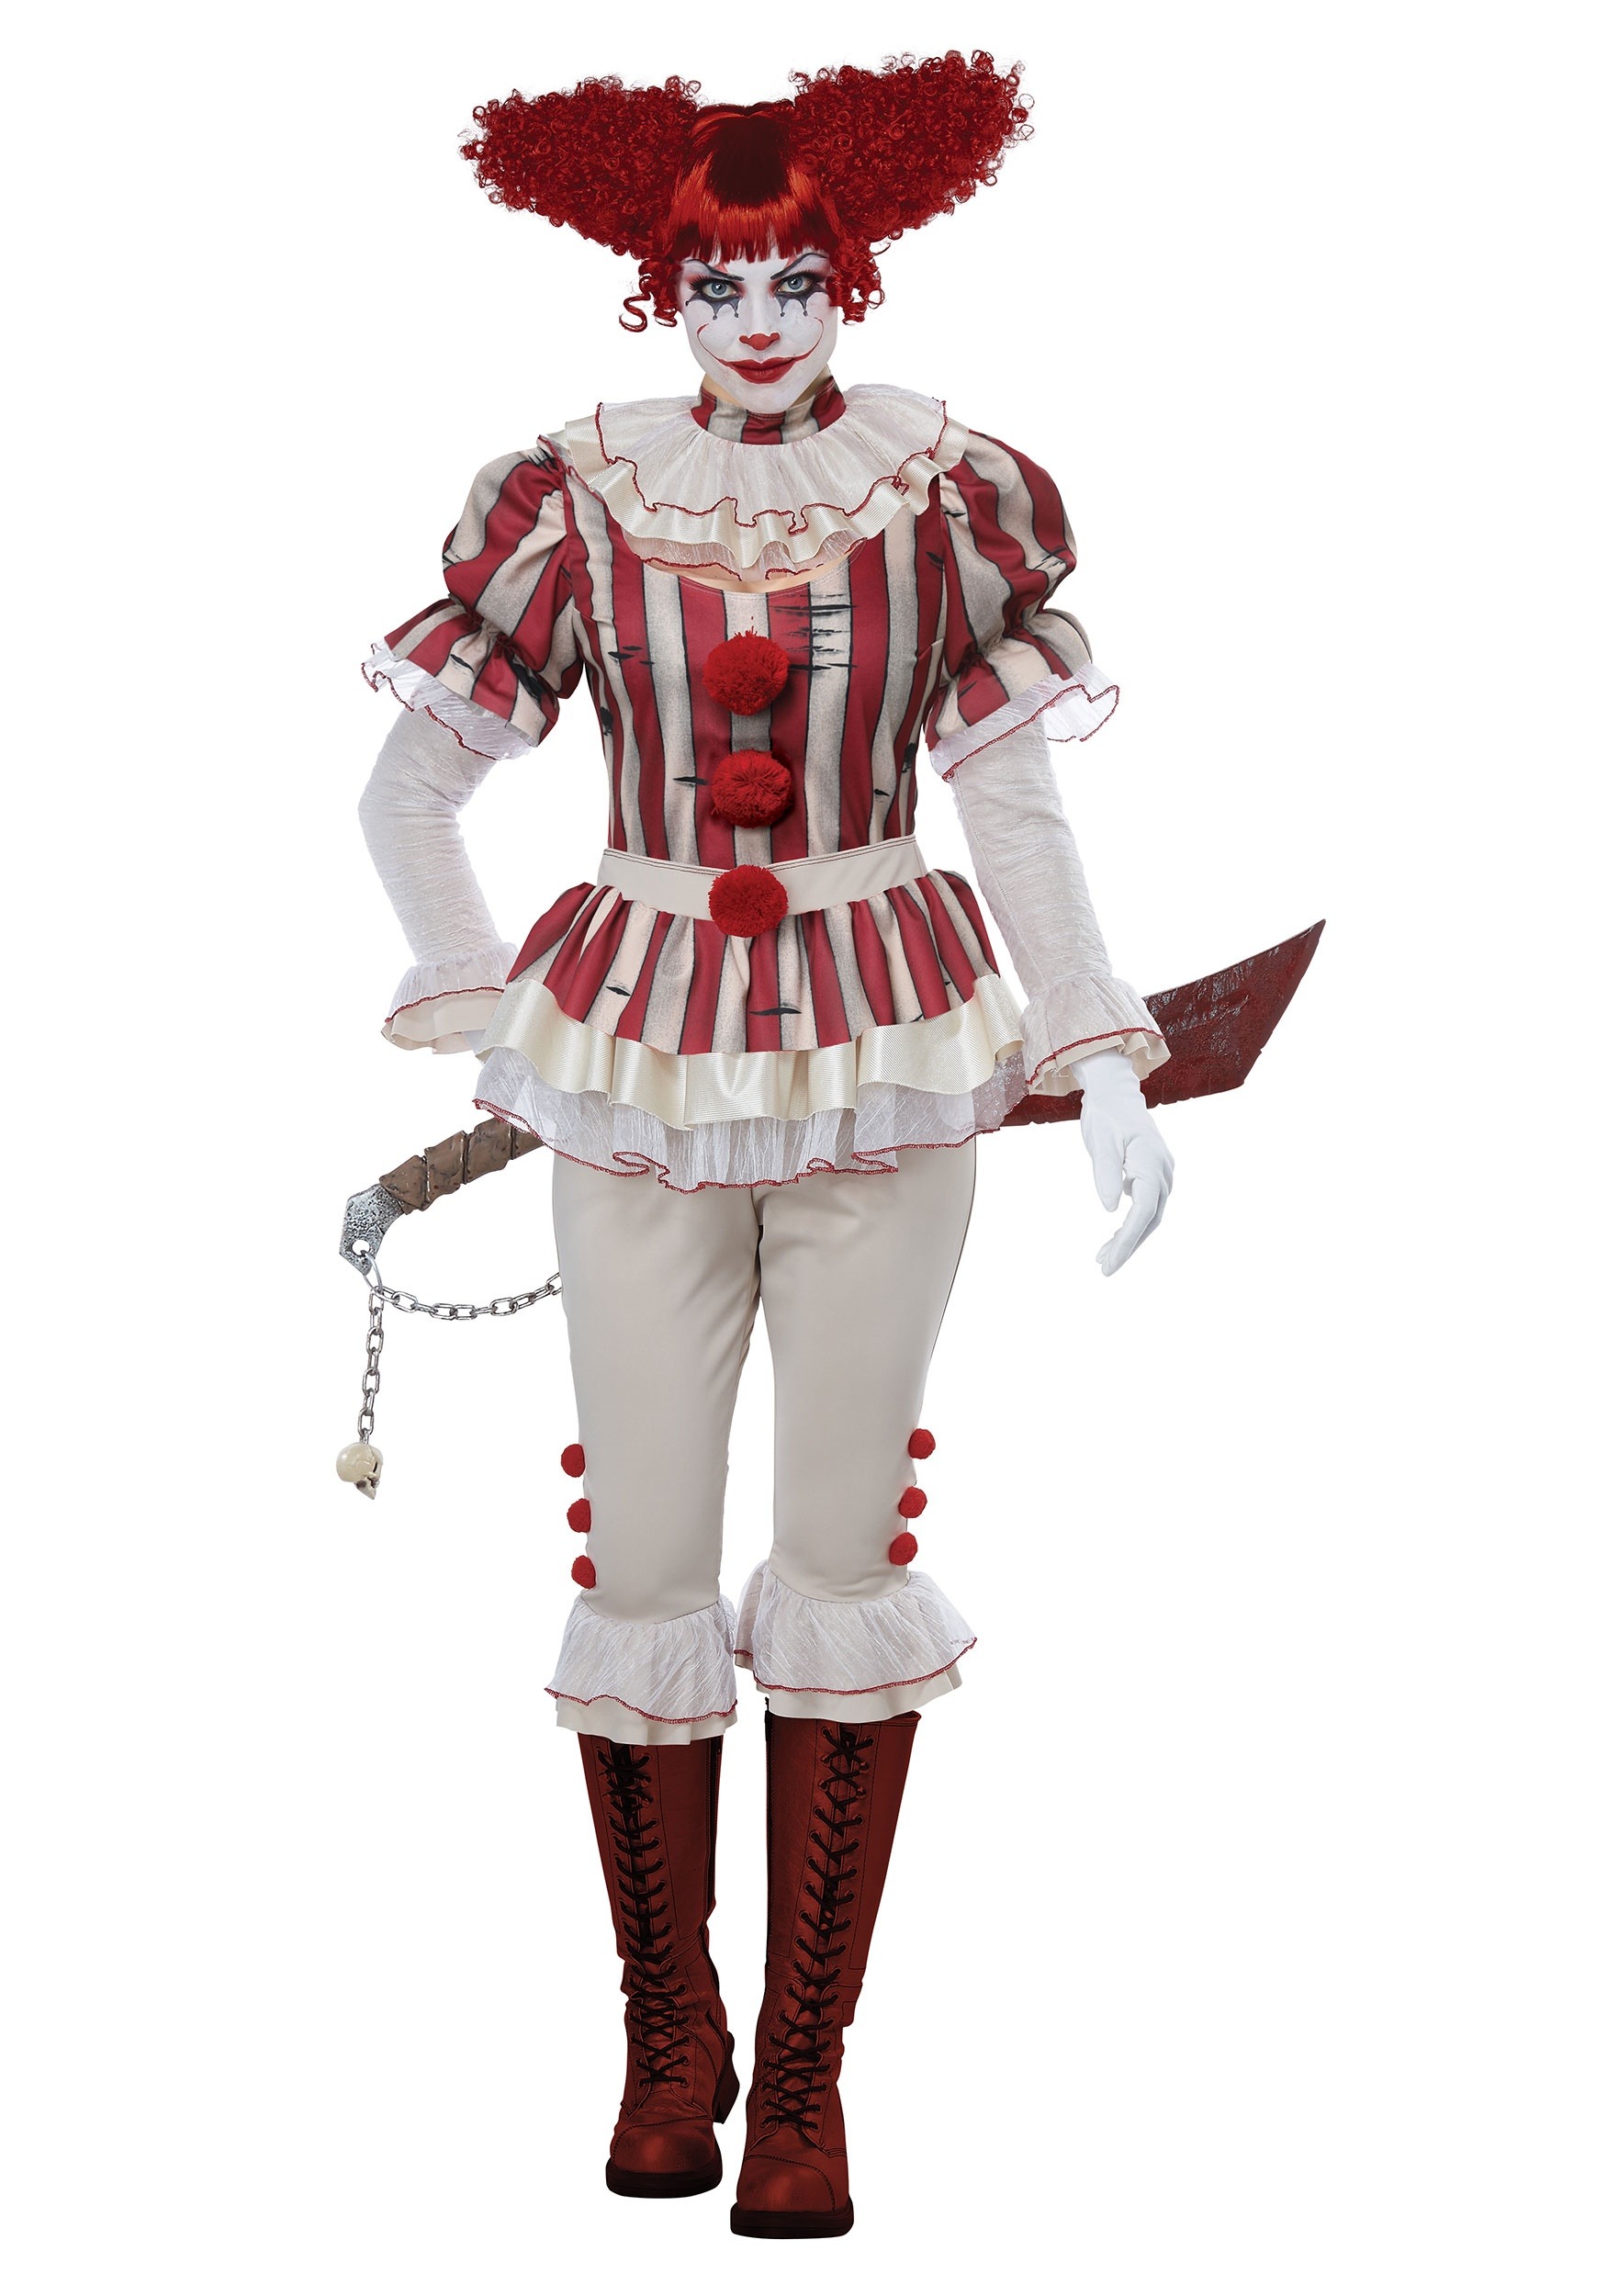 Photos - Fancy Dress California Costume Collection Women's Sadistic Clown Costume Red/White 